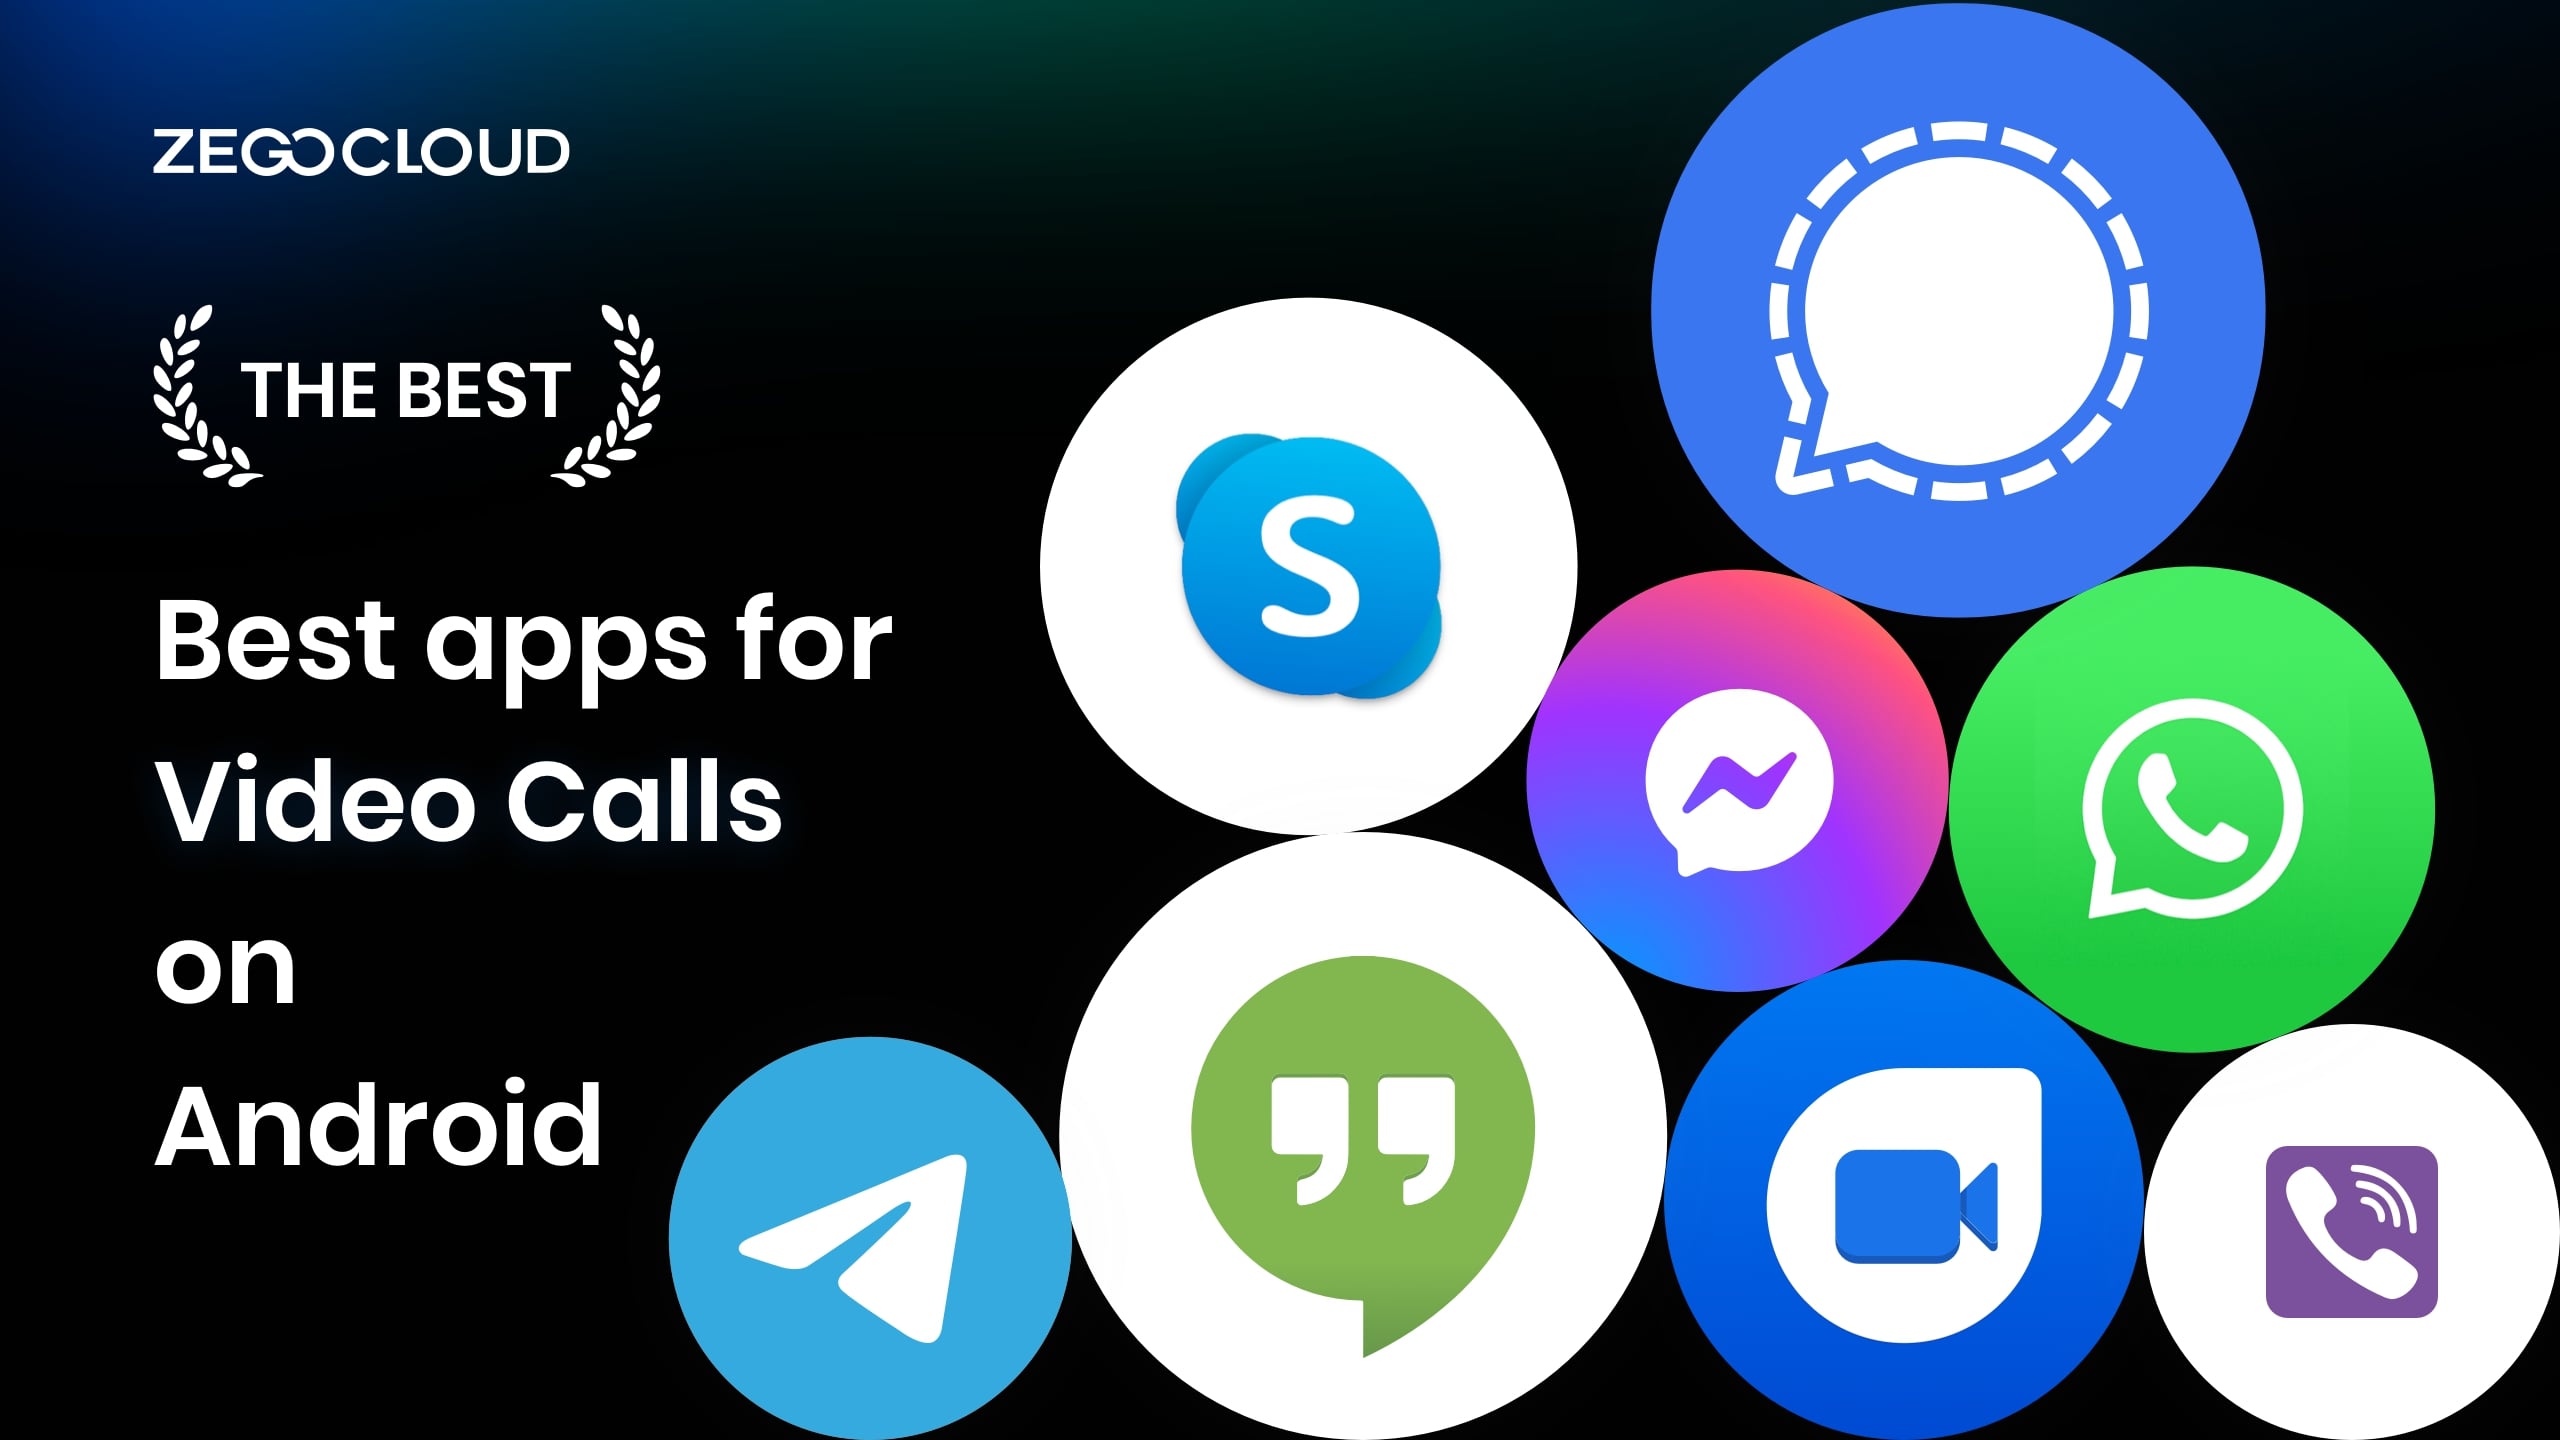 Best apps for Video Calls on Android